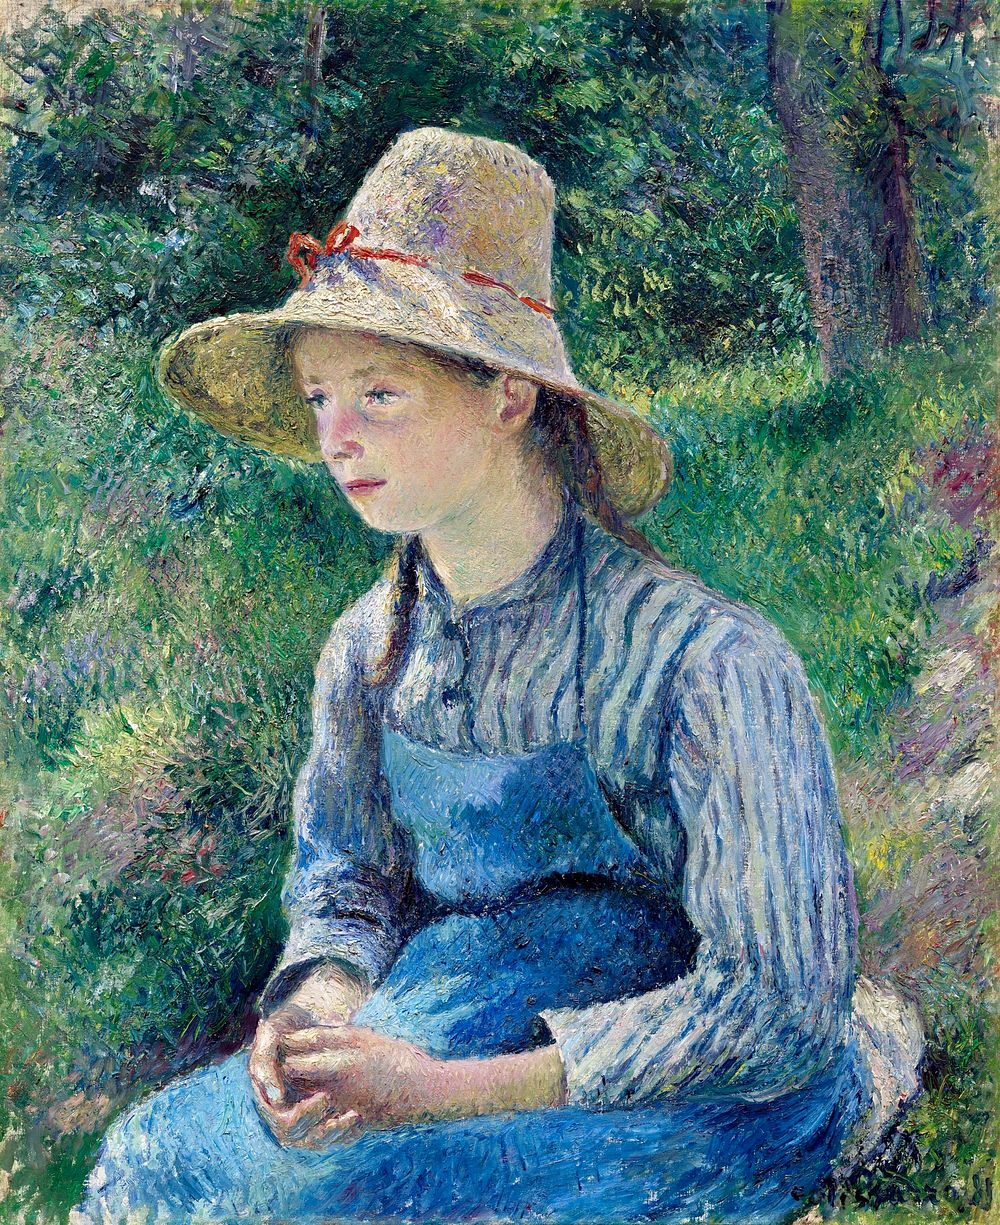 Peasant Girl with a Straw Hat (1881) by Camille Pissarro. Original from The National Gallery of Art. Digitally enhanced by…